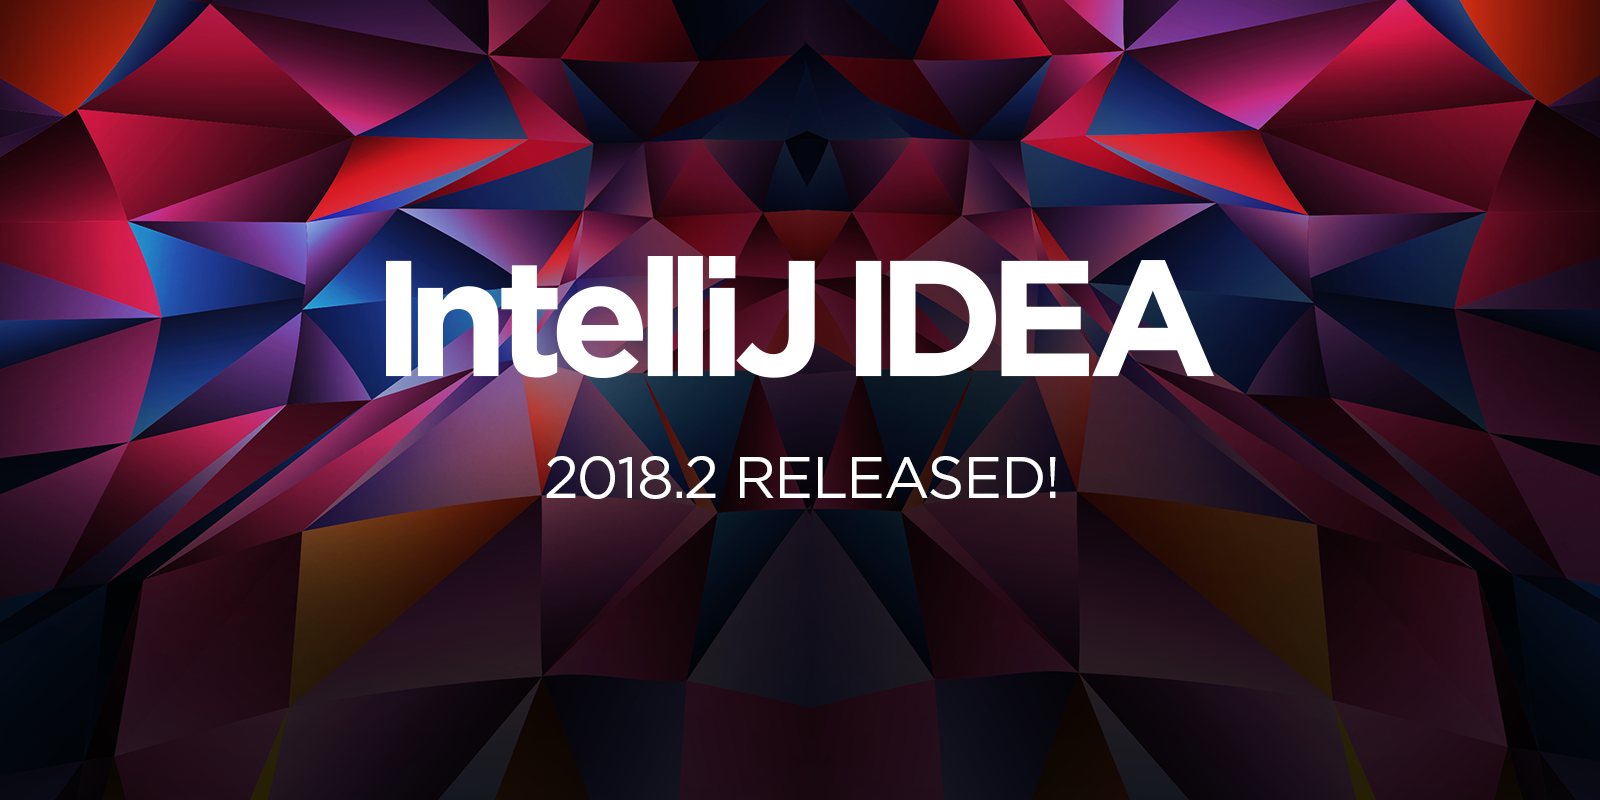 IntelliJ IDEA Ultimate 2023.1.3 instal the new for android